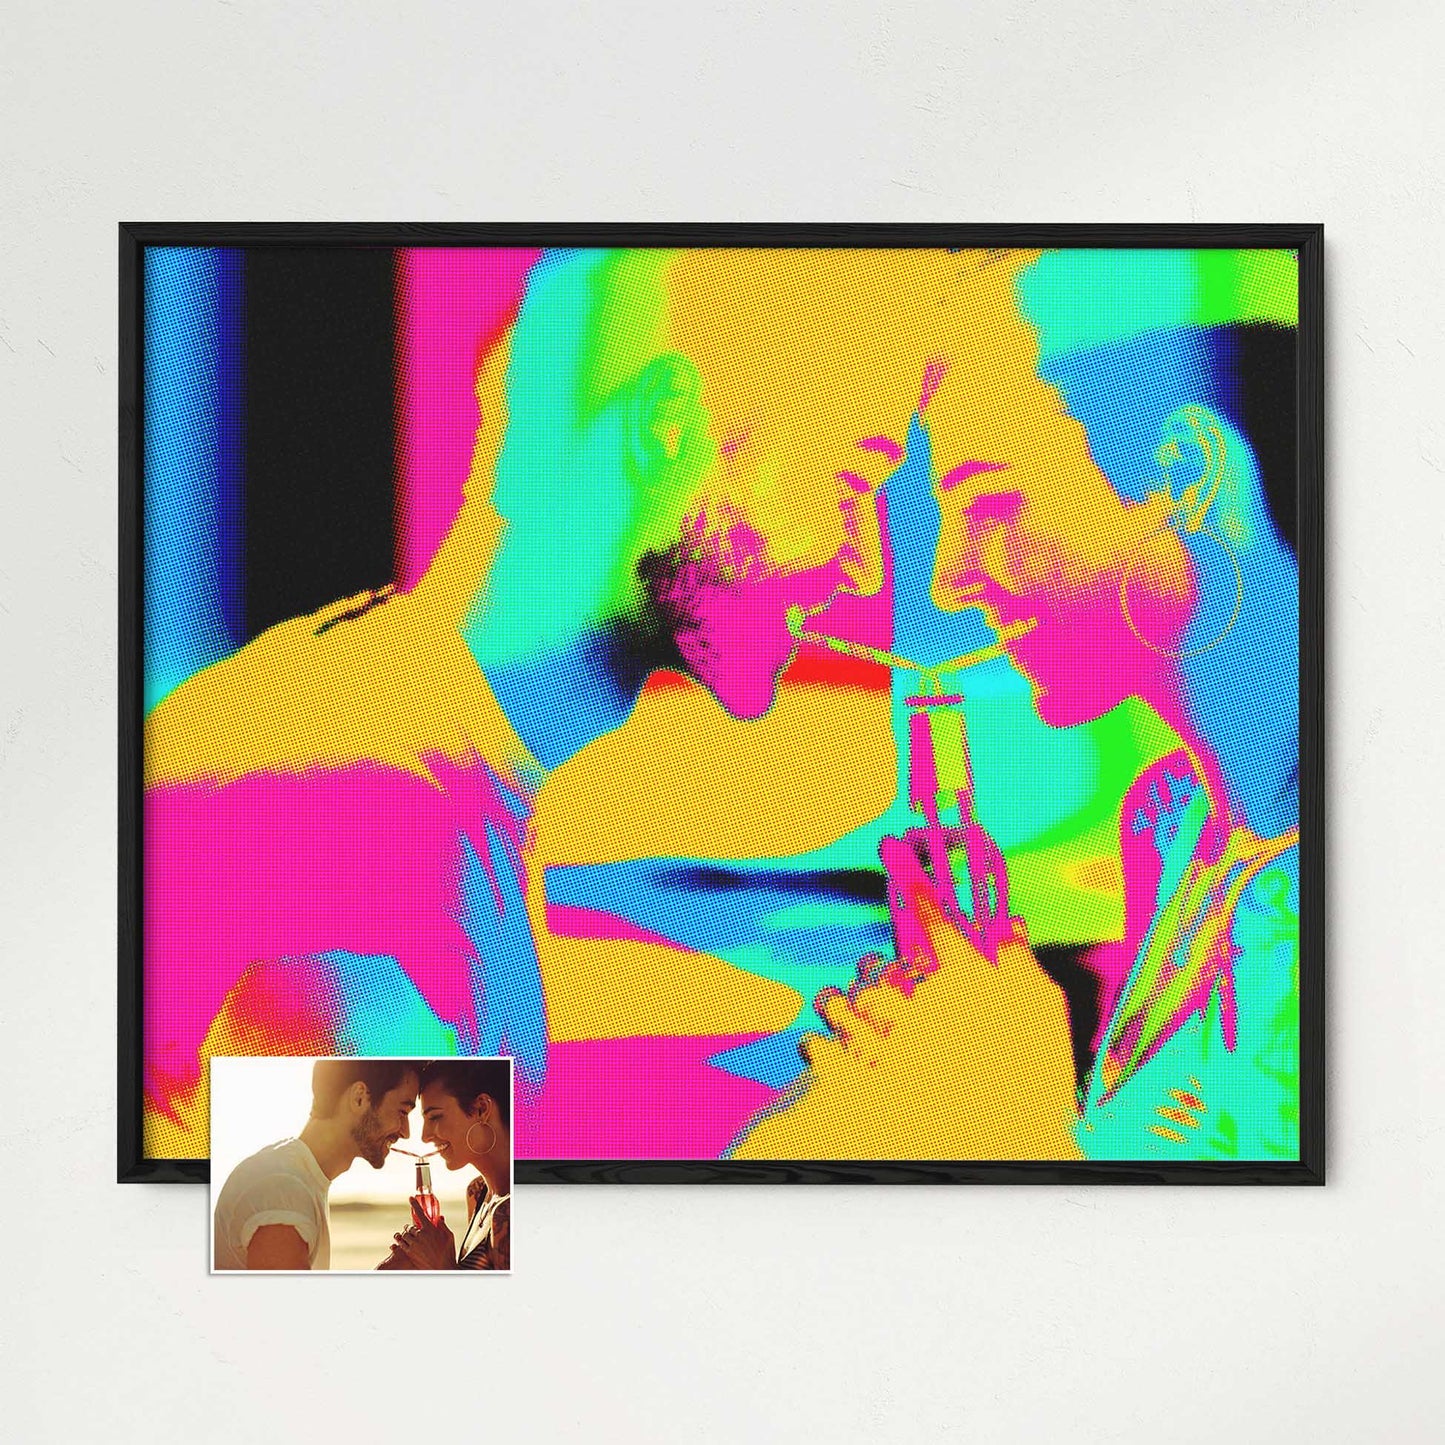 Add a splash of color to your home decor with our Personalised Pop Art Framed Print. Created by printing from photo, it showcases a captivating pop art style with a halftone effect. The bold and vibrant colors of pink, orange, green, blue